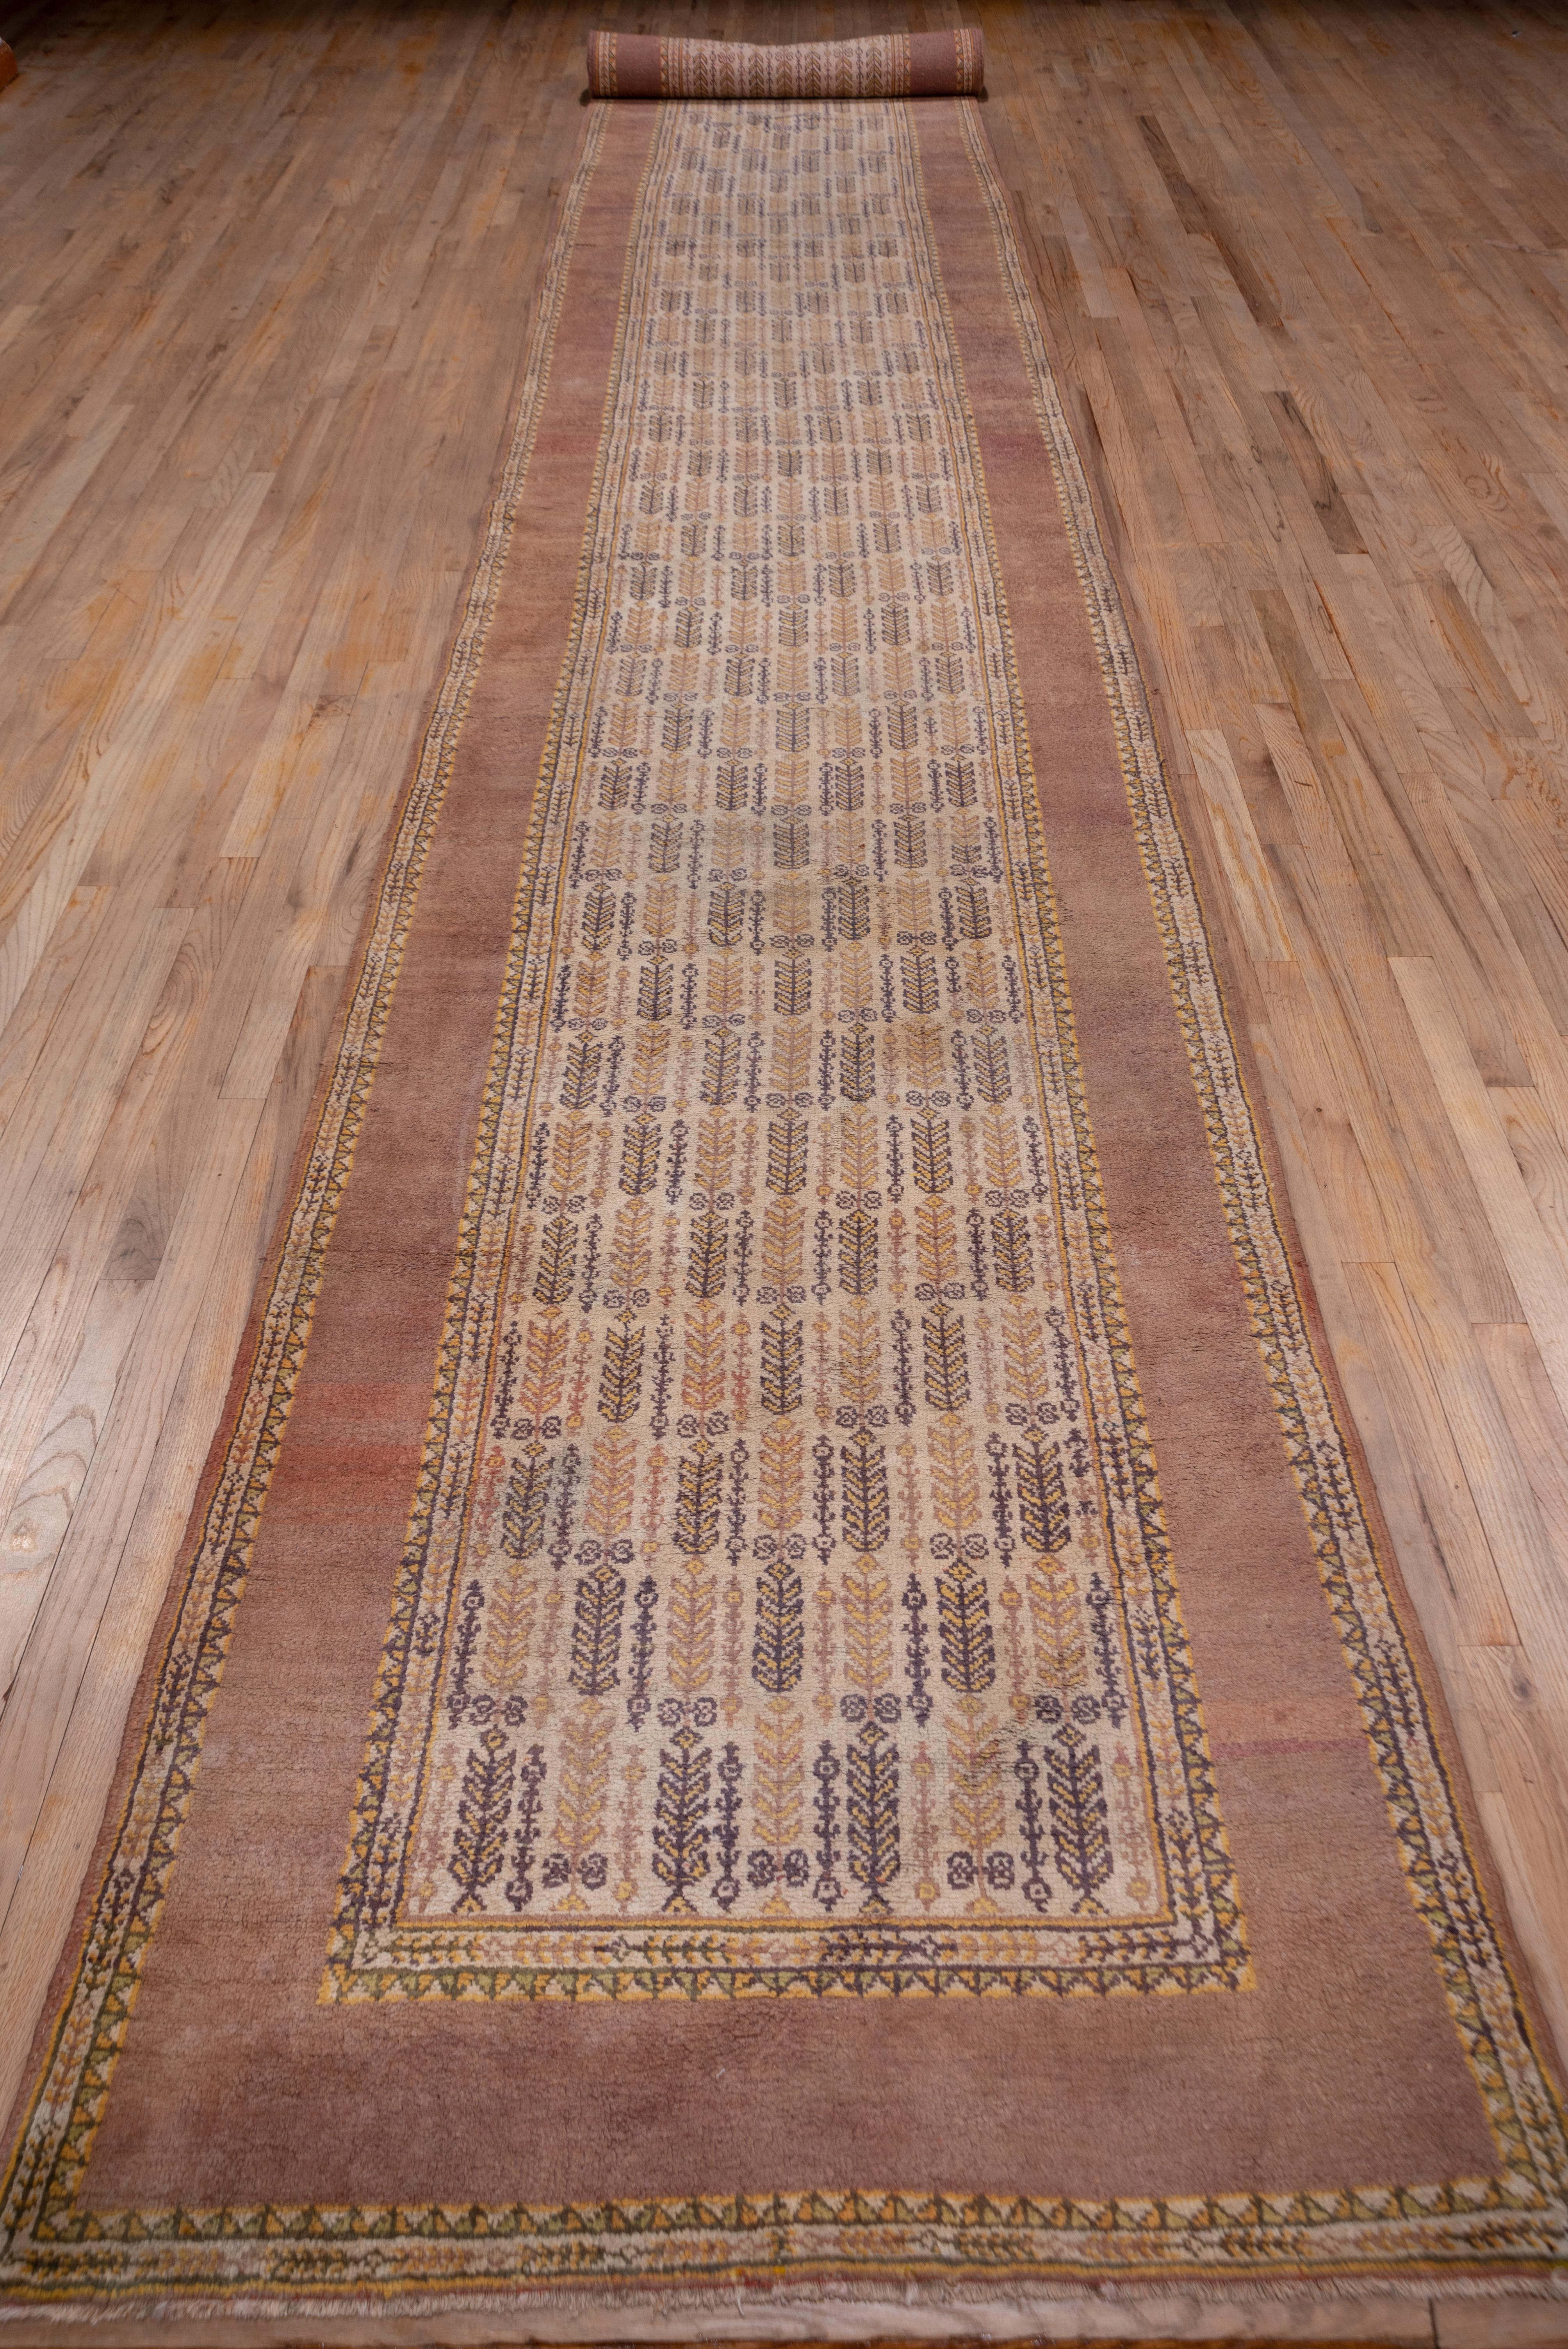 This relatively coarsely woven northern Indian runner features an ecru field with rows of leafy plants in lemon yellow and blue-green. The wide, plain dusty rose-tan border is flanked by triangle and herringbone minors.